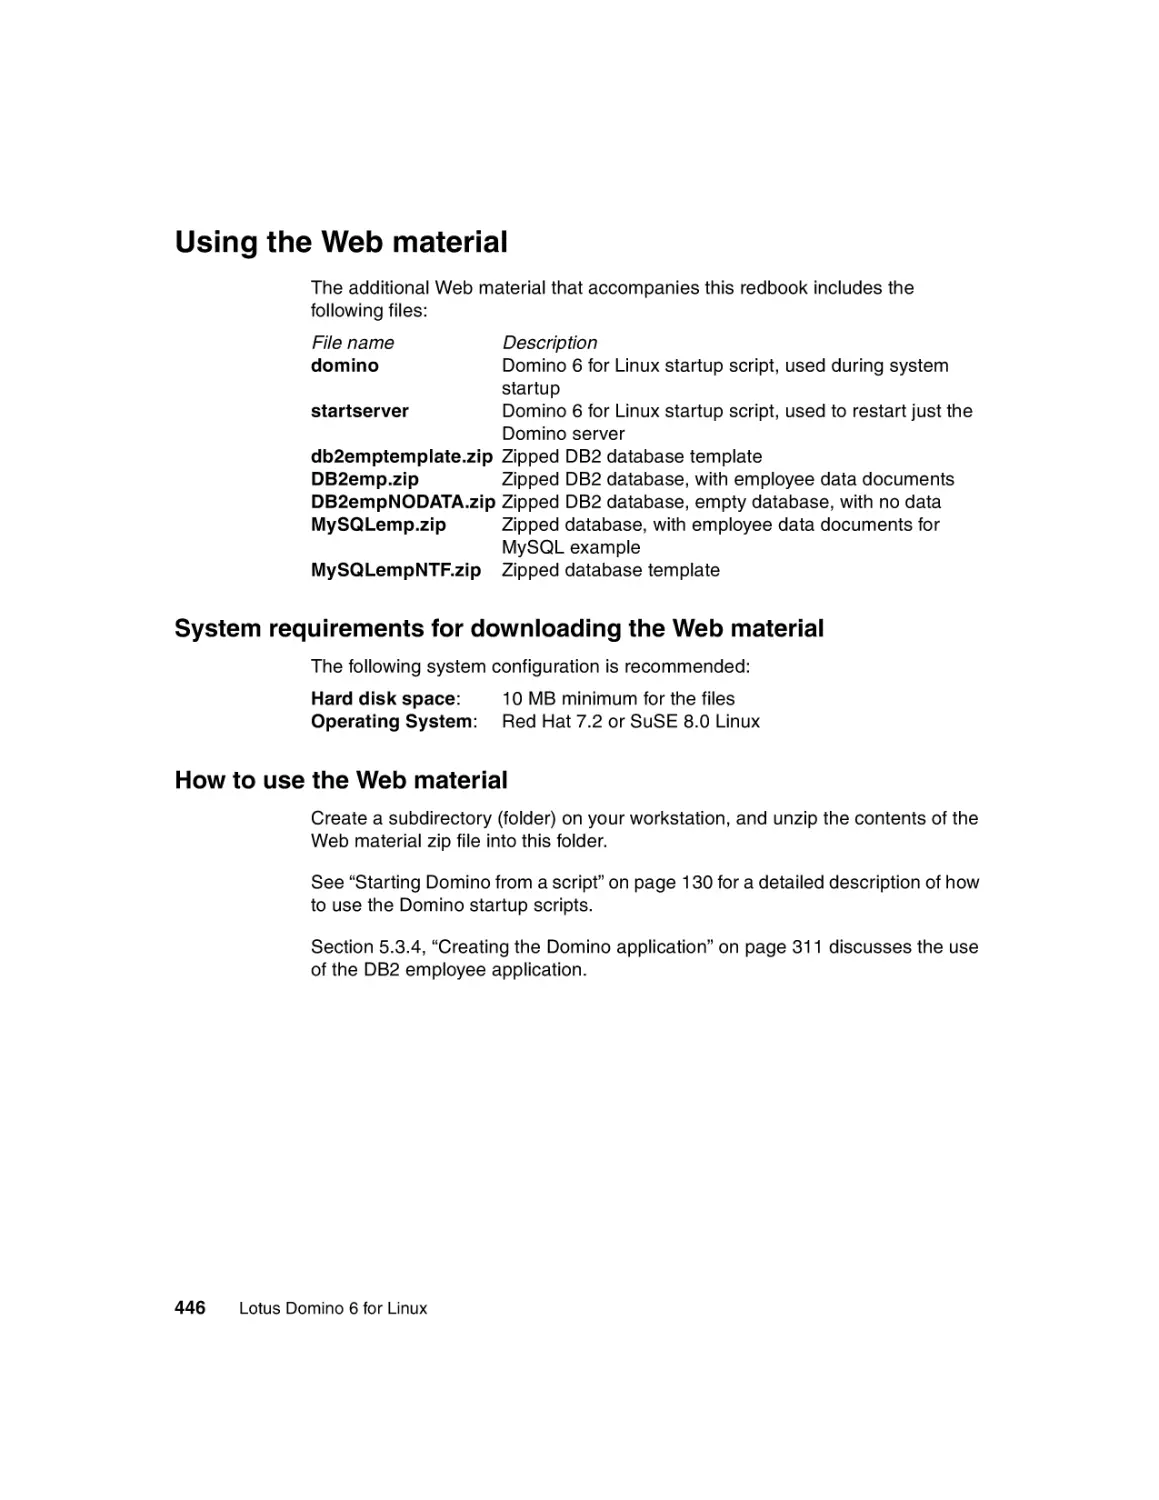 Using the Web material
System requirements for downloading the Web material
How to use the Web material